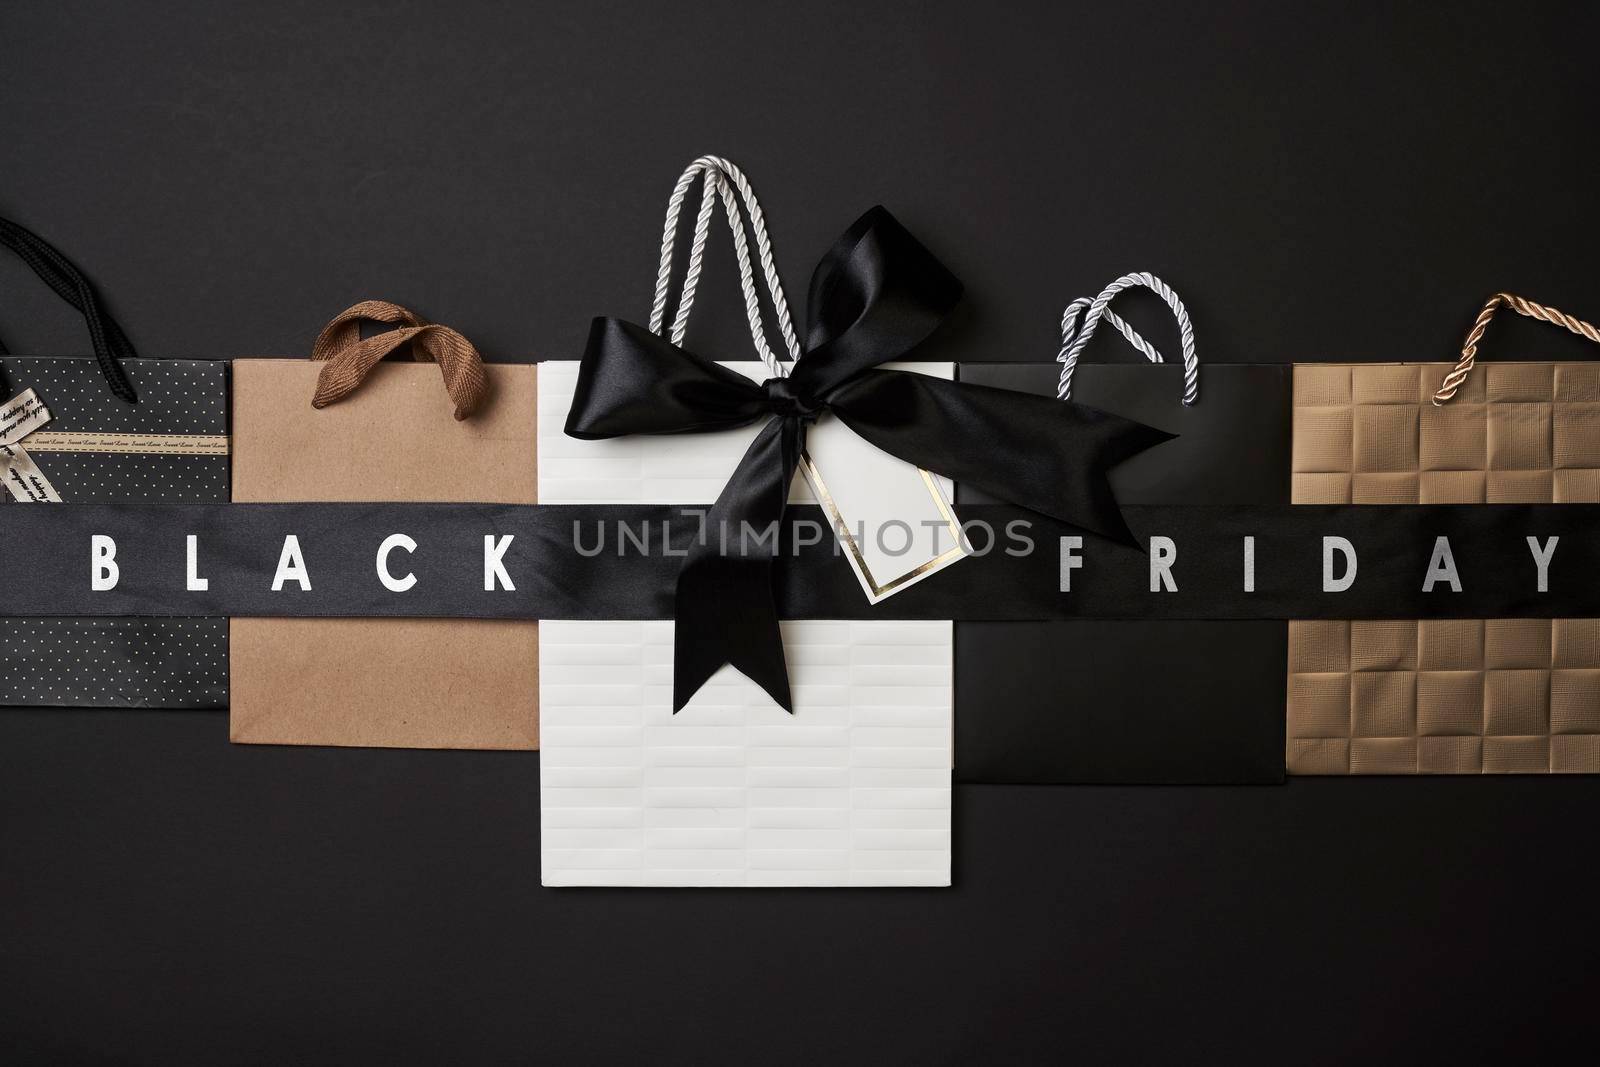 Black friday concept. Pile of various shopping bags on black background.